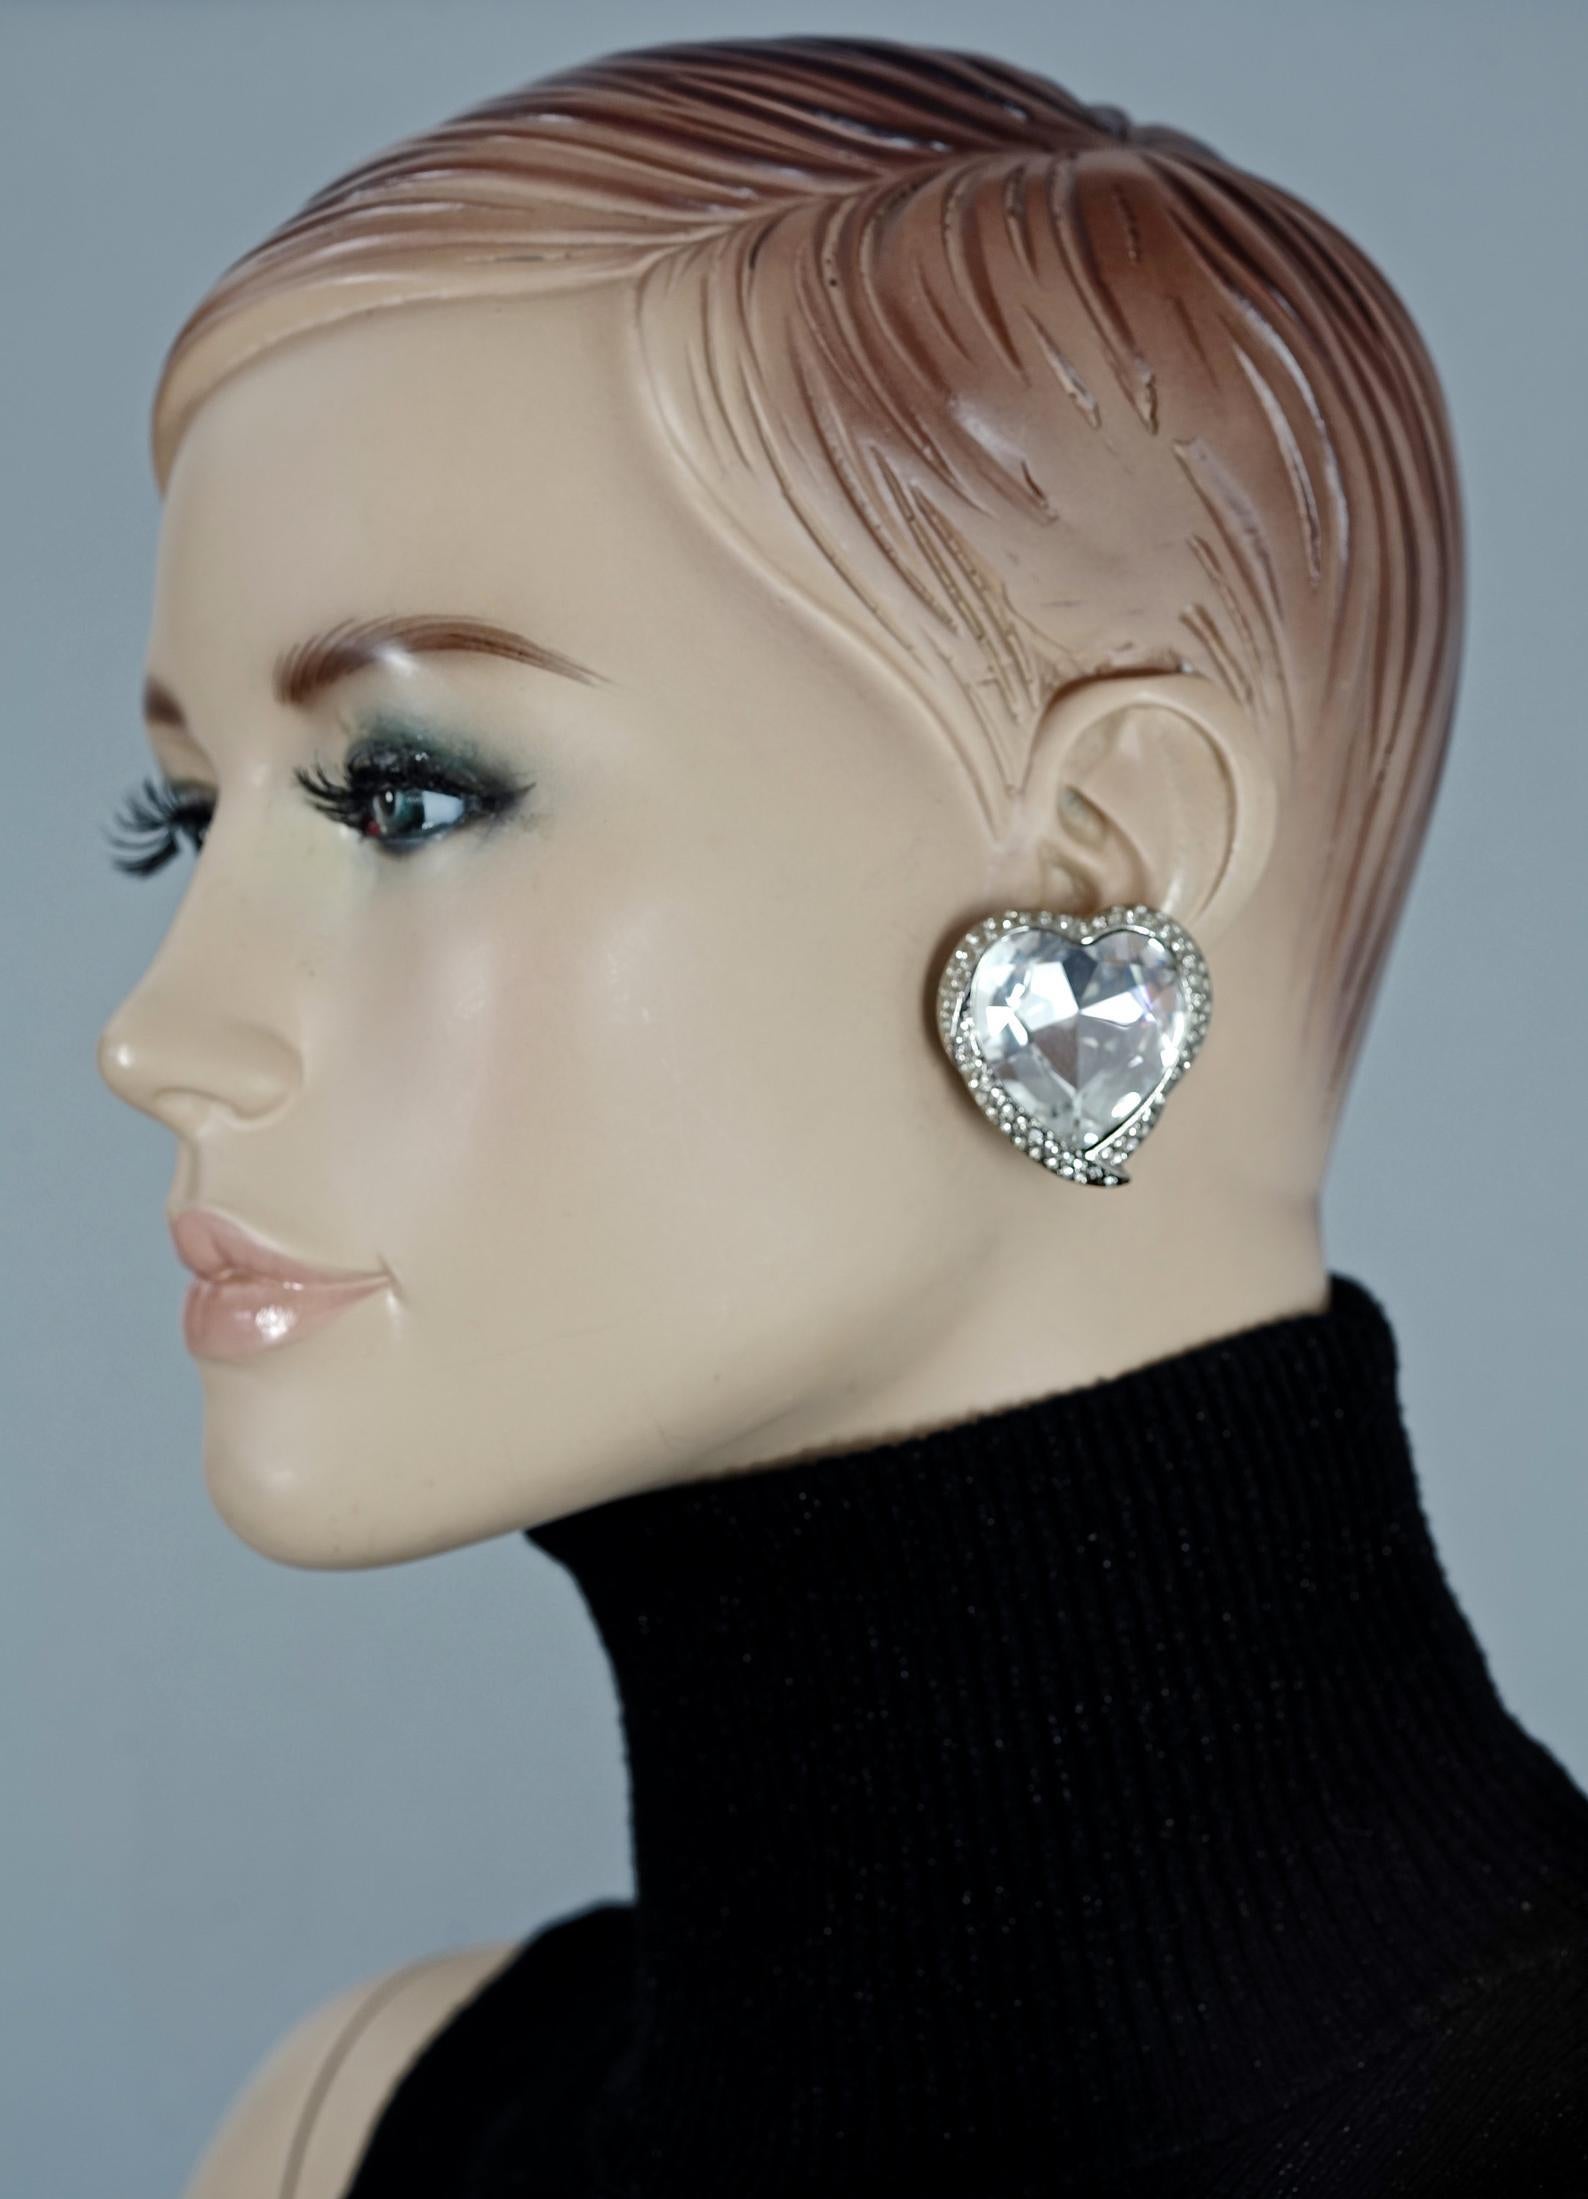 Vintage YVES SAINT LAURENT Ysl Faceted Heart Rhinestone Earrings

Measurements:
Height: 1.42 inches (3.6 cm)
Width: 1.42 inches (3.6 cm)
Weight per Earring: 22 grams

Features:
- 100% Authentic YVES SAINT LAURENT.
- Earrings with raised faceted